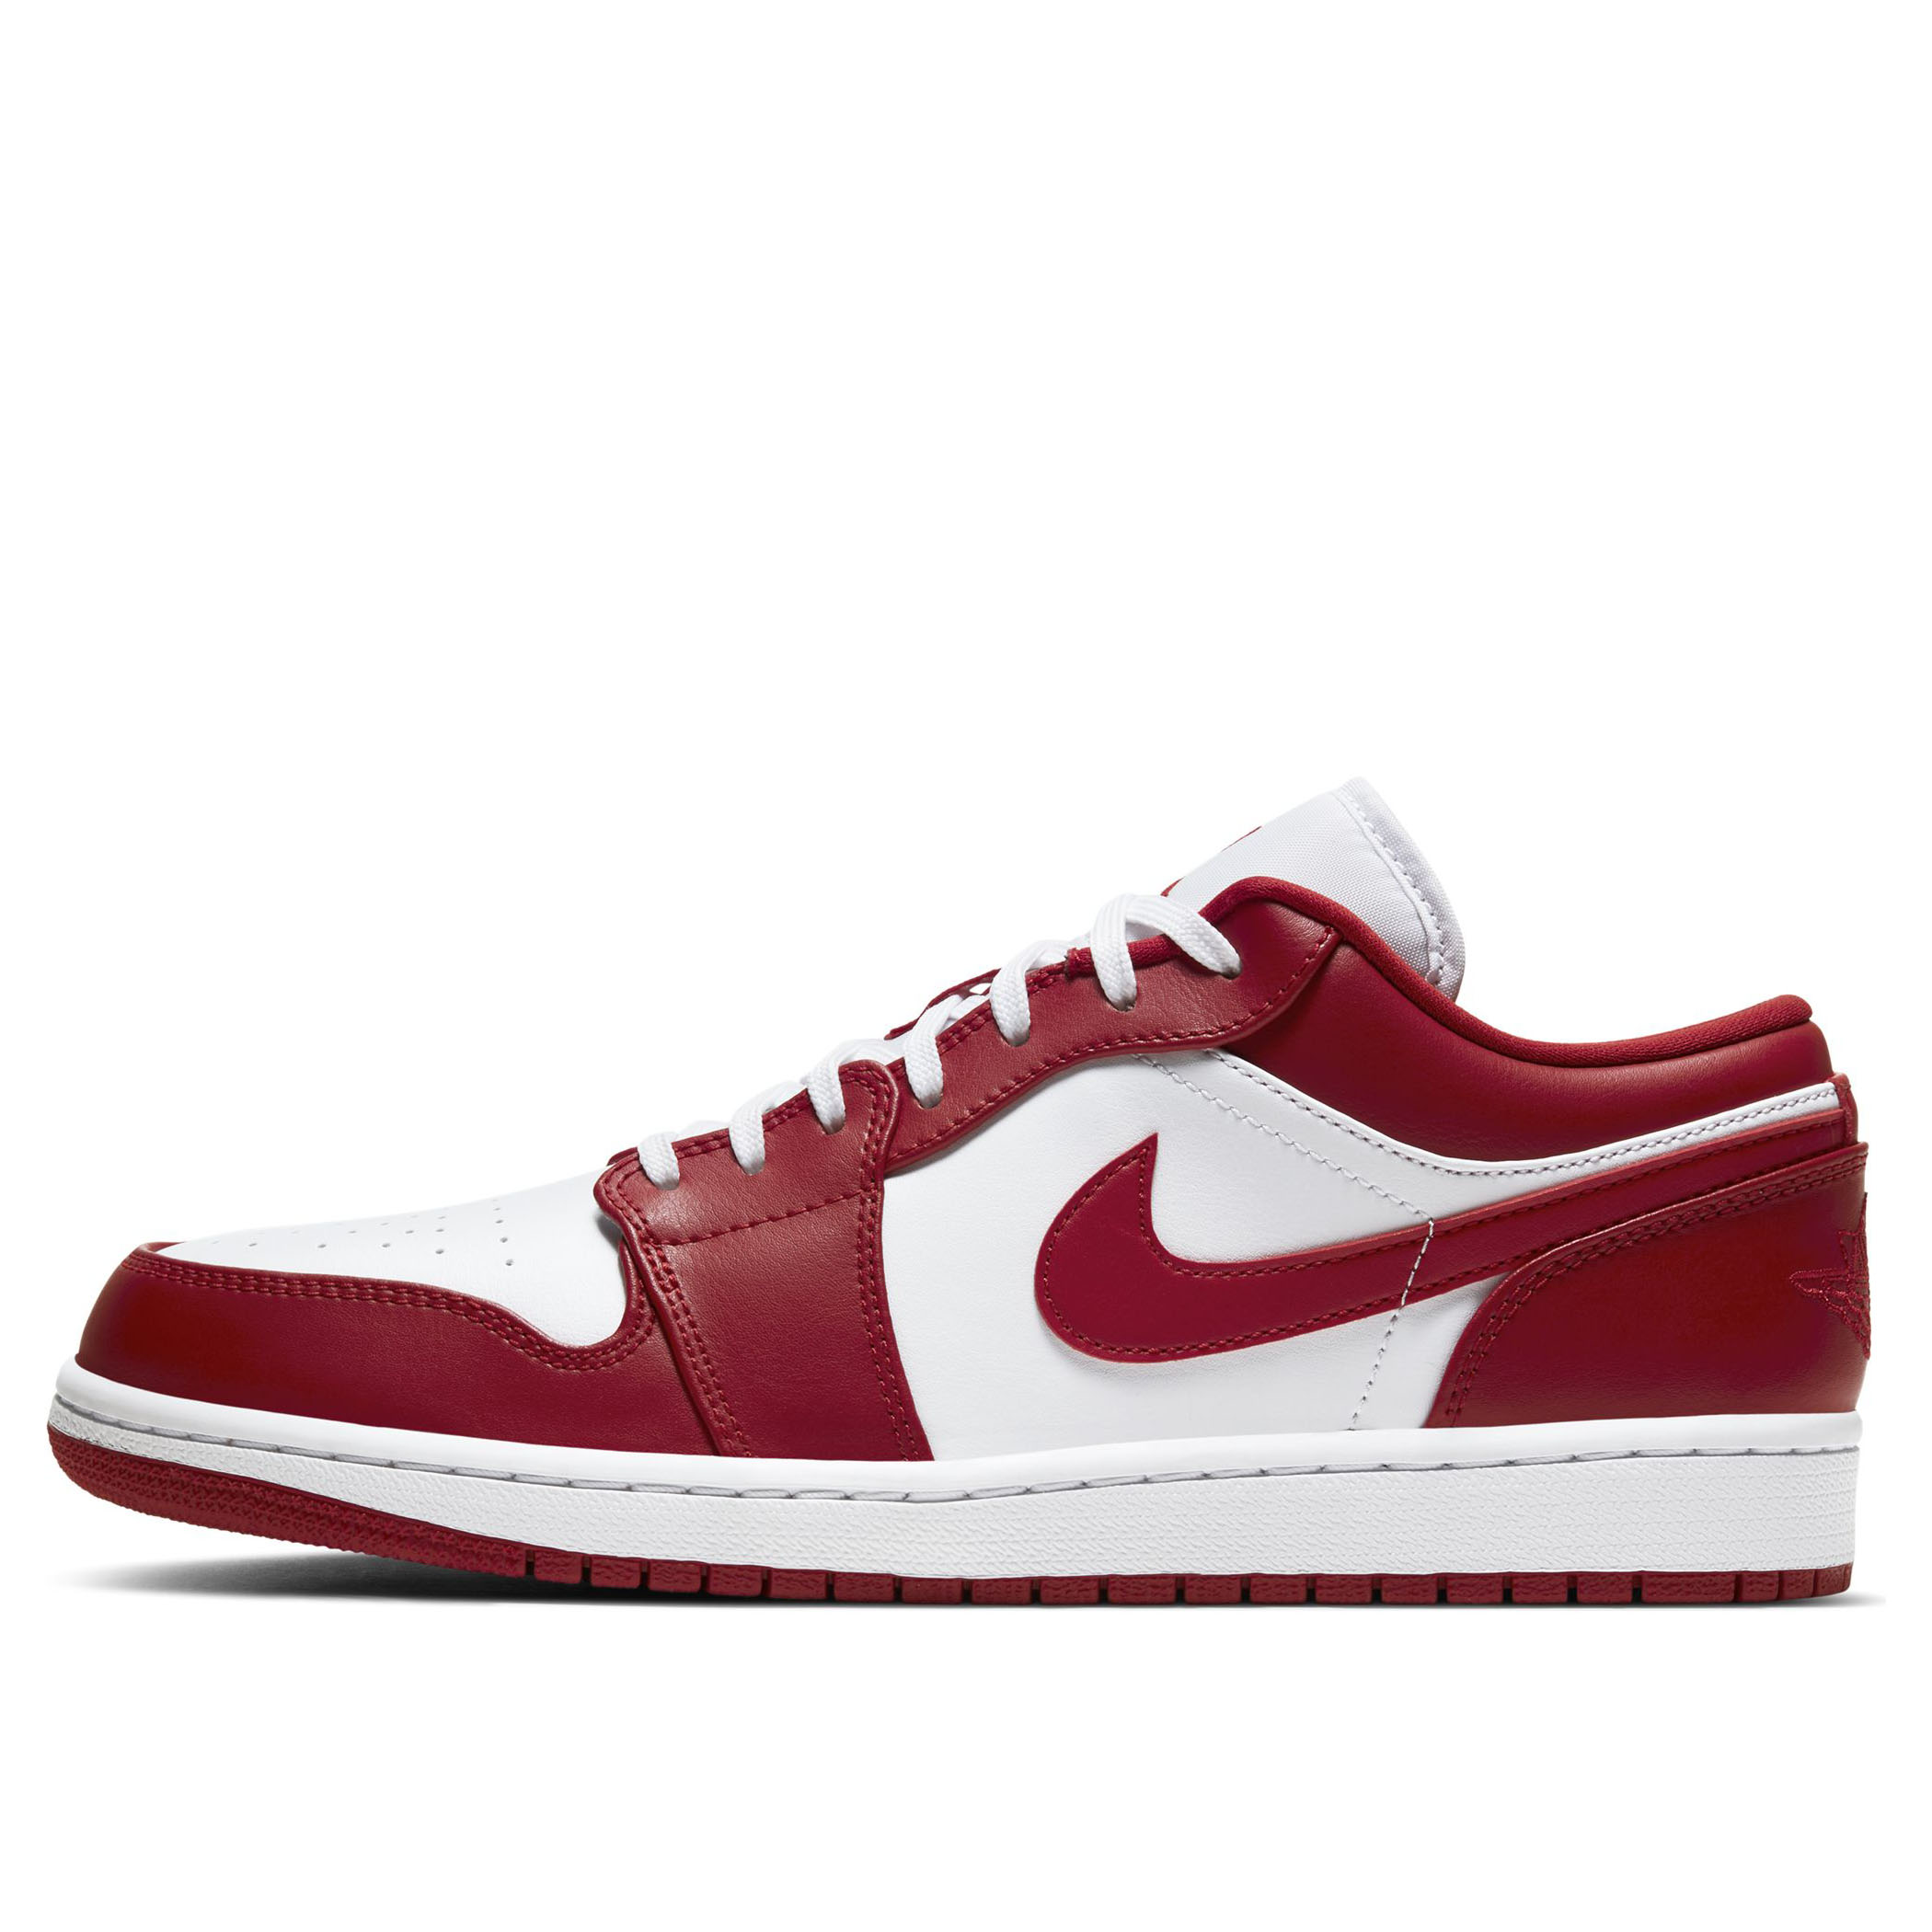 Low 553558-611 Gym Red/Gym Red-White 